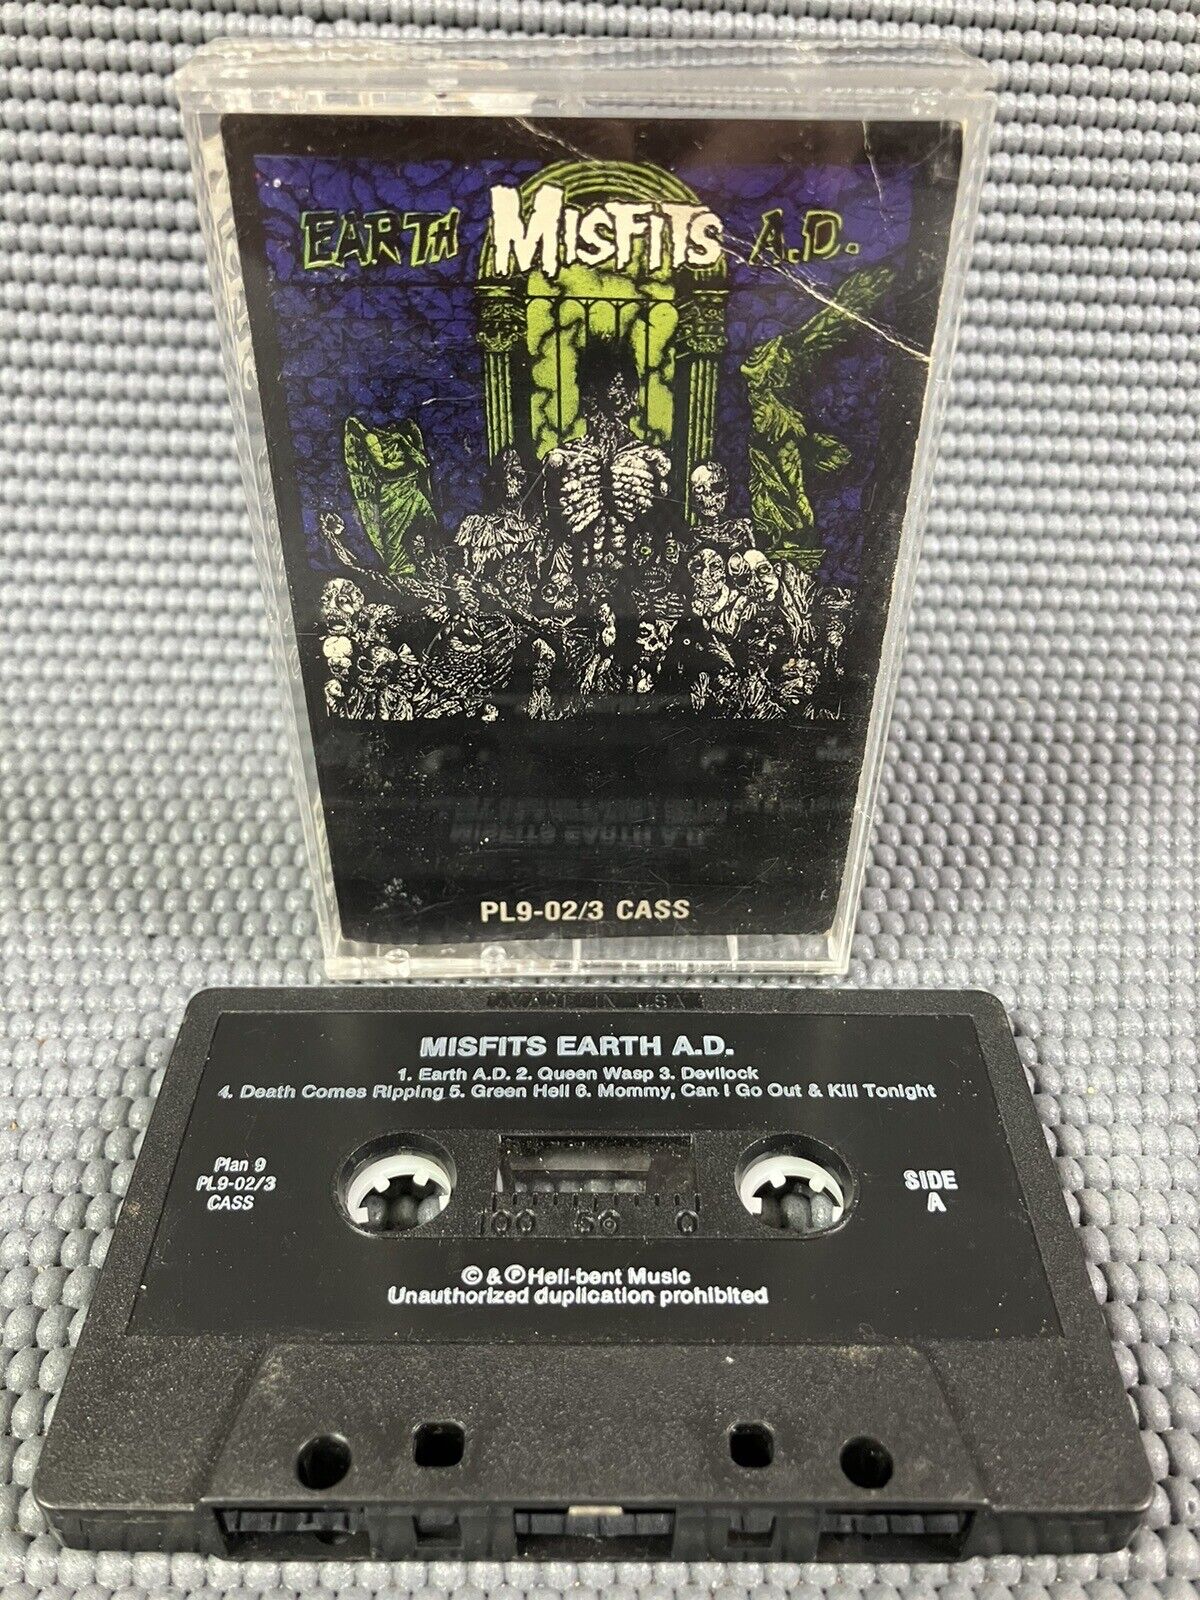 MISFITS Earth AD A.D. Cassette Plan 9 Black Shell 1986 PL9-02/3 Danzig Tested